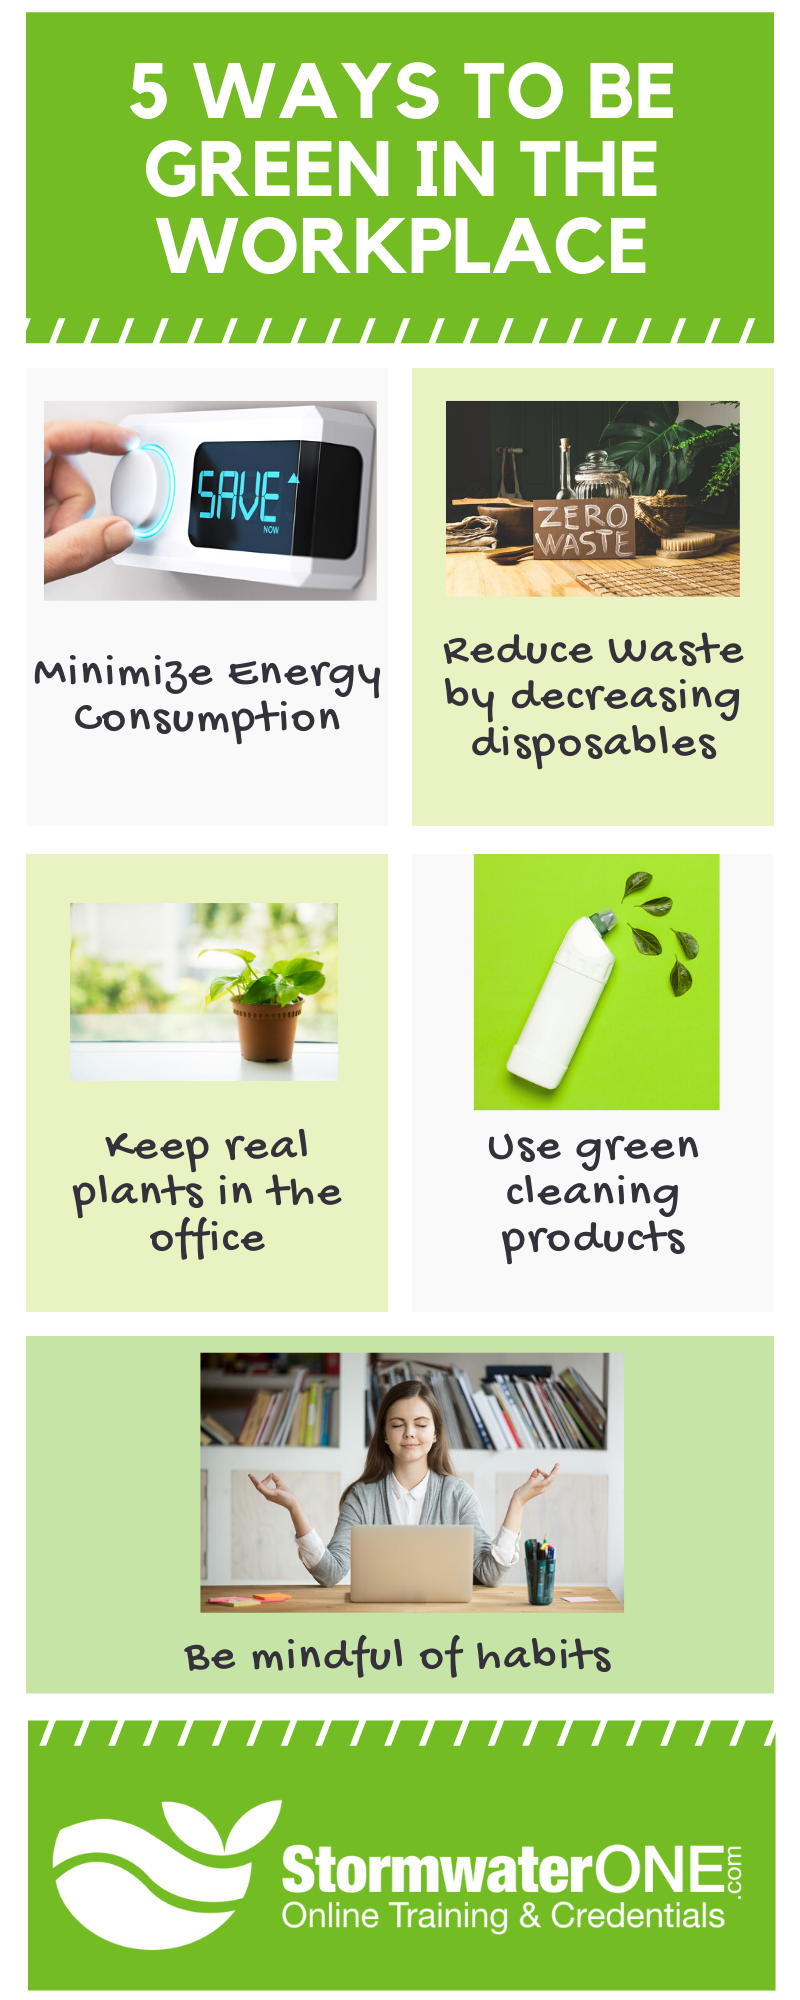 5 ways to go green in the workplace